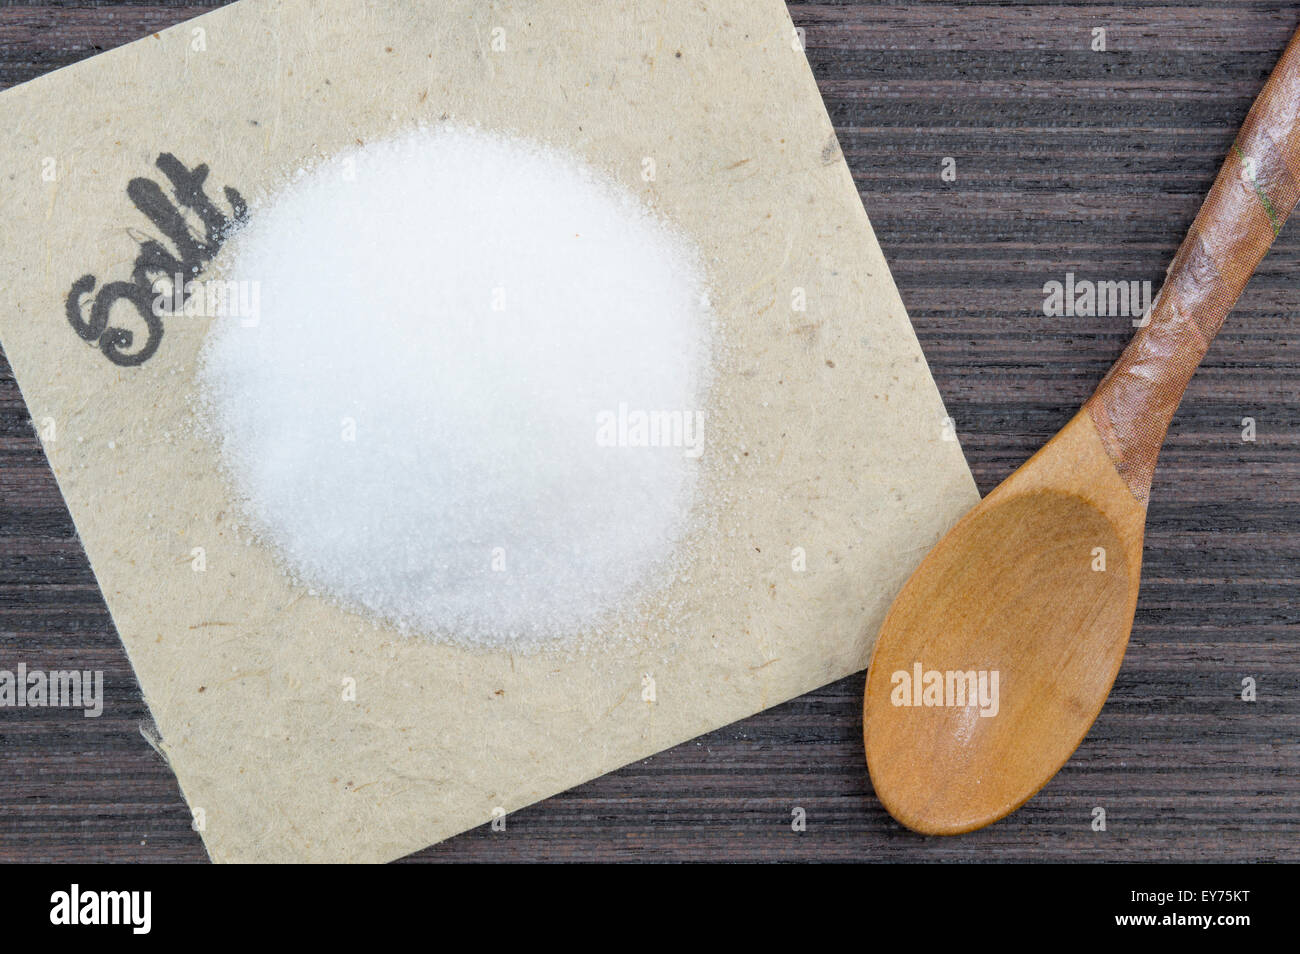 Pile of salt and a wooden spoon on the table Stock Photo